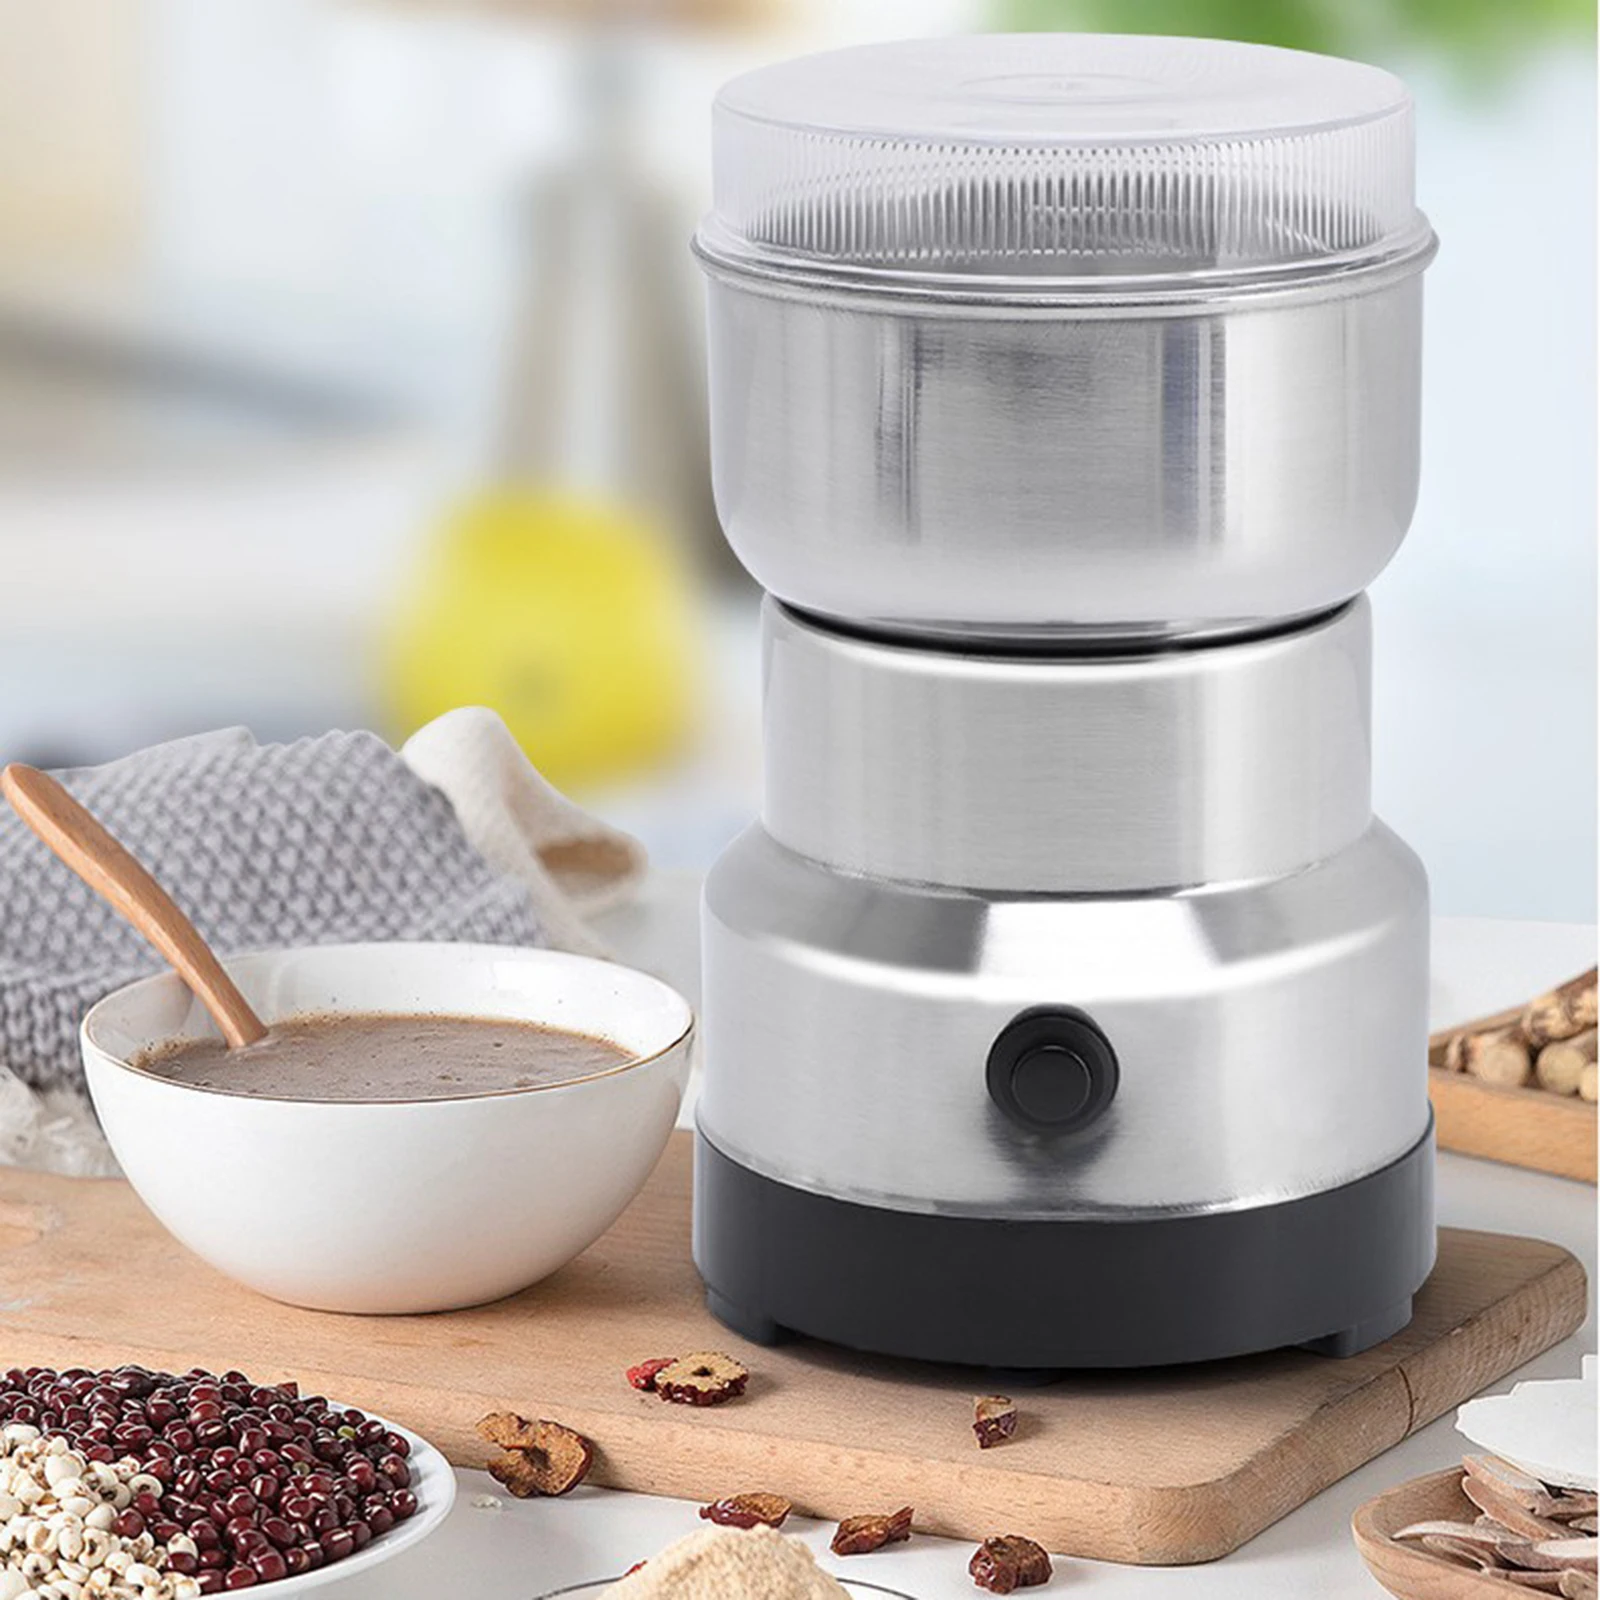 Multifunction Electric Smash Machine,Electric Coffee Bean Milling Smash Machine,Household Electric Cereals Grain Seasonings Spices Milling Machine Grinder for Daily Use. 